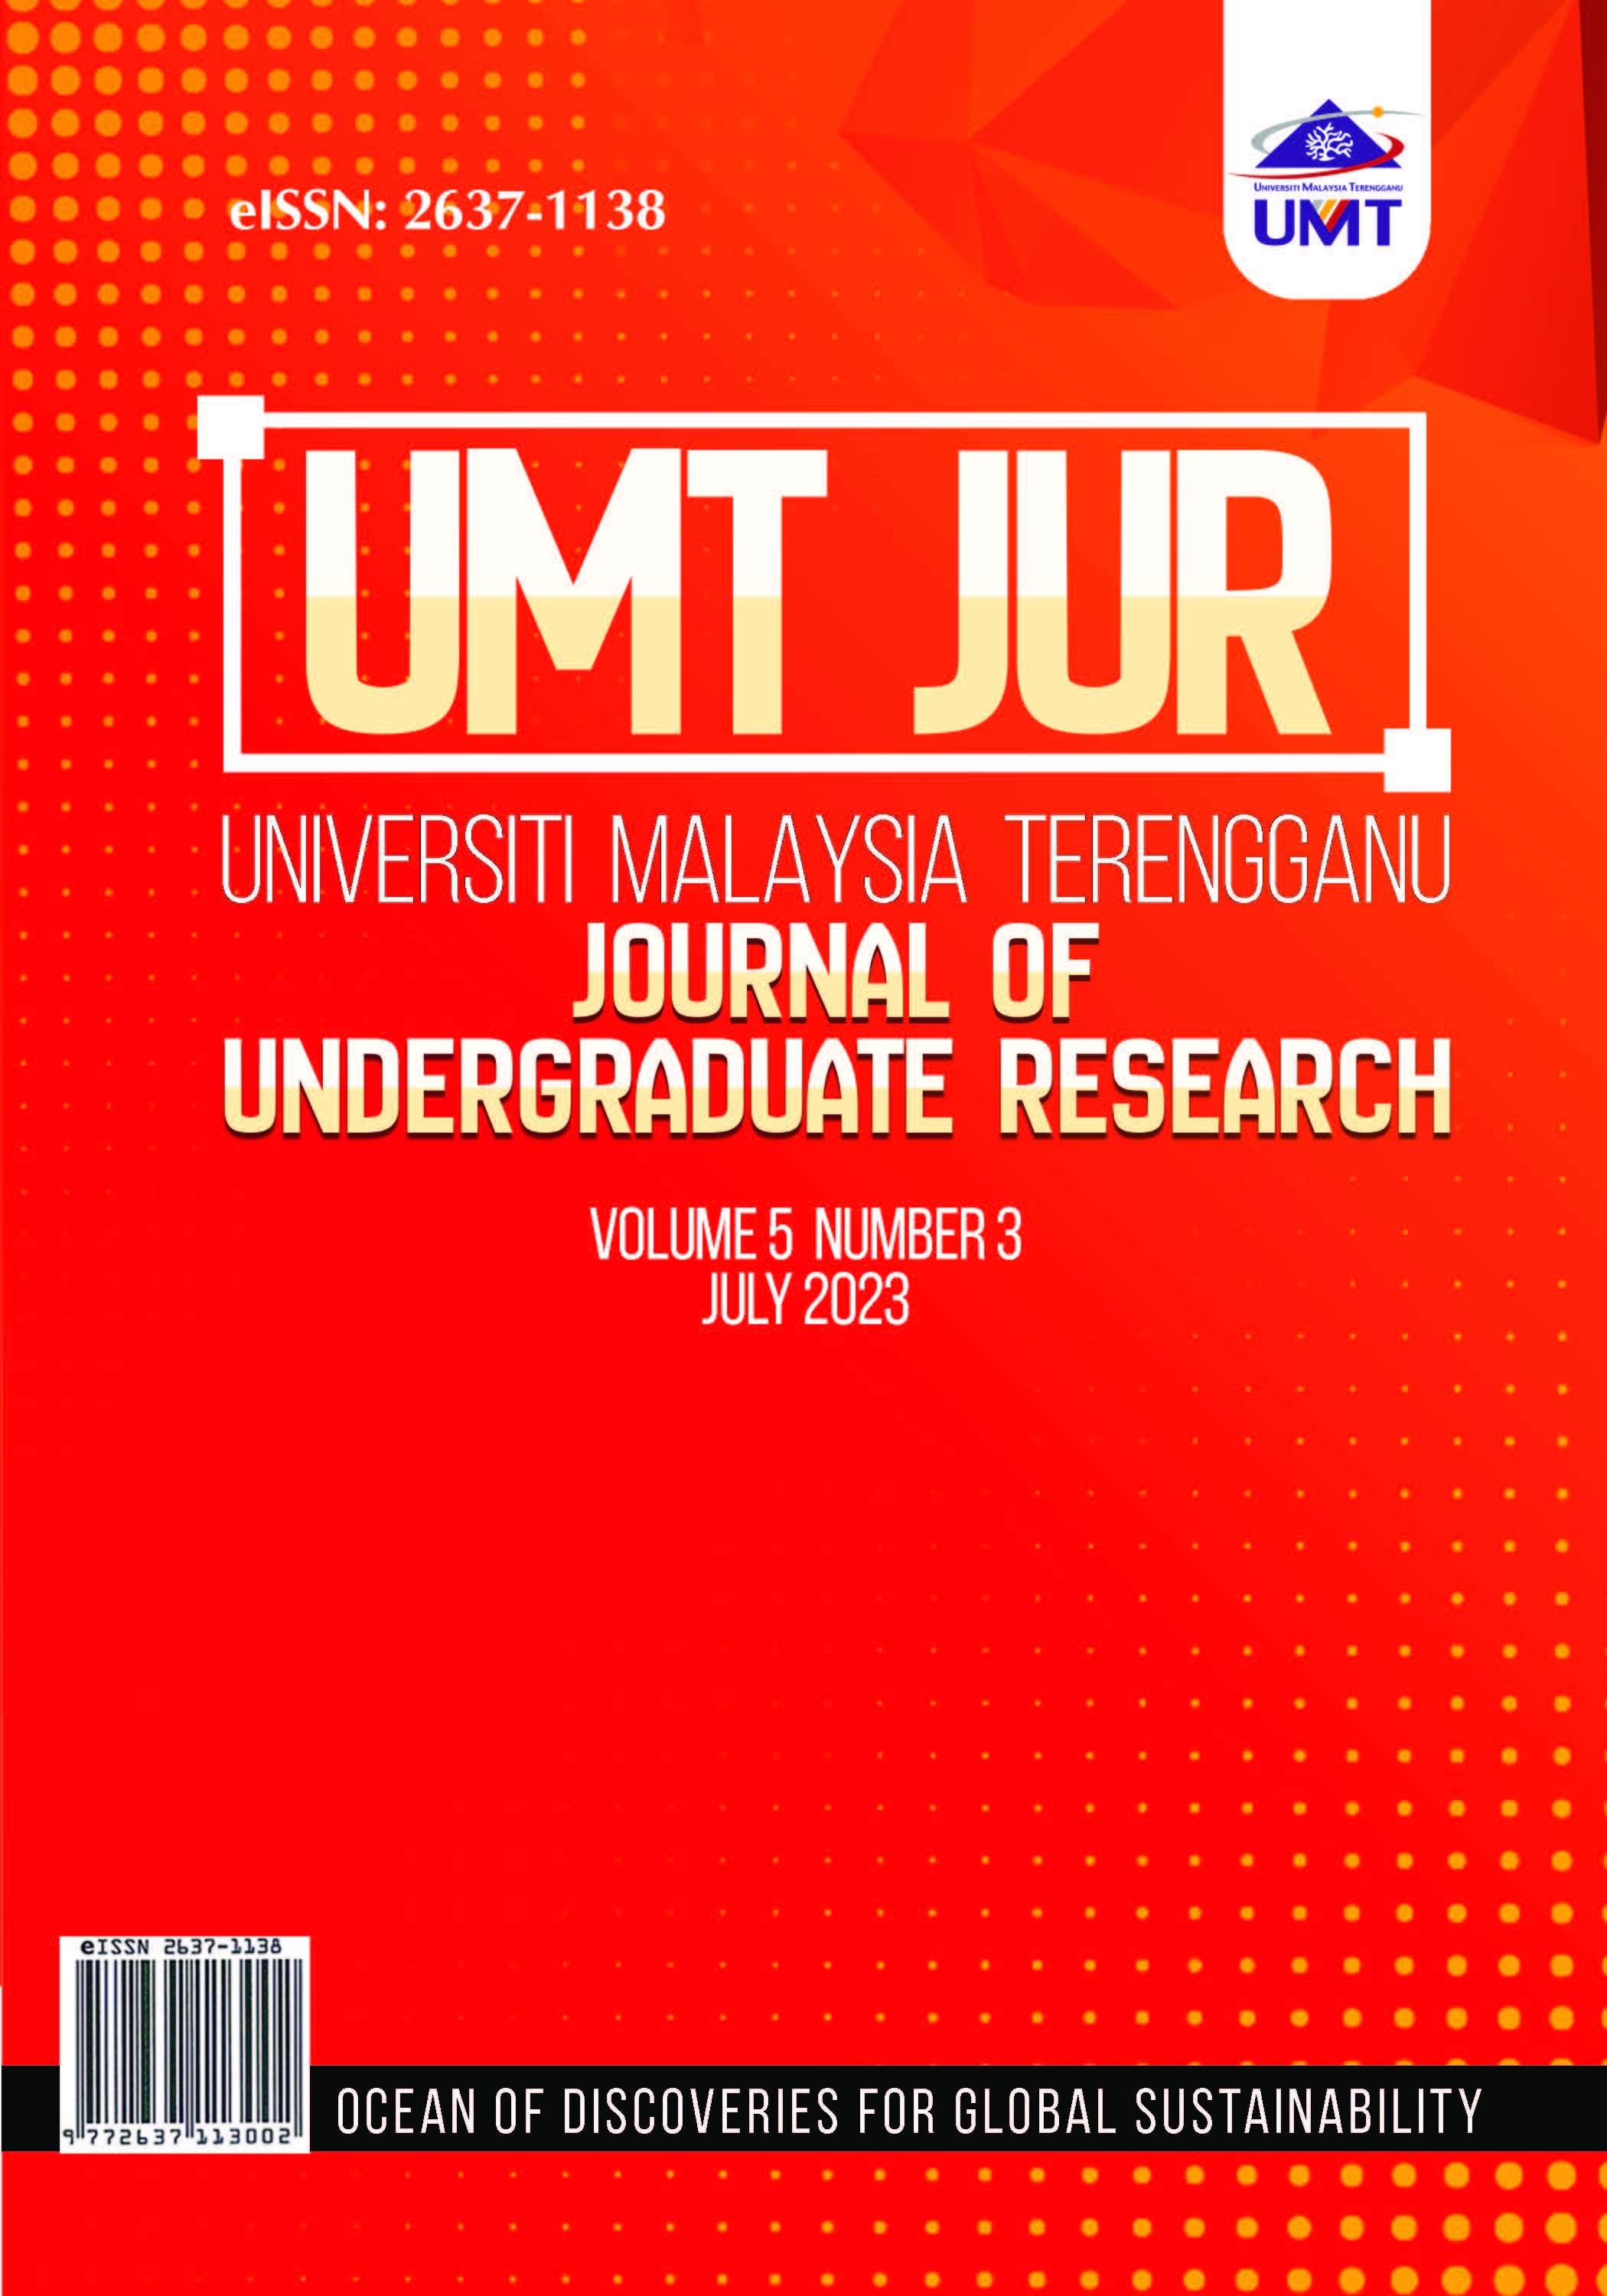 					View Vol. 5 No. 3 (2023): UMT Journal of Undergraduate Research, July 2023 
				